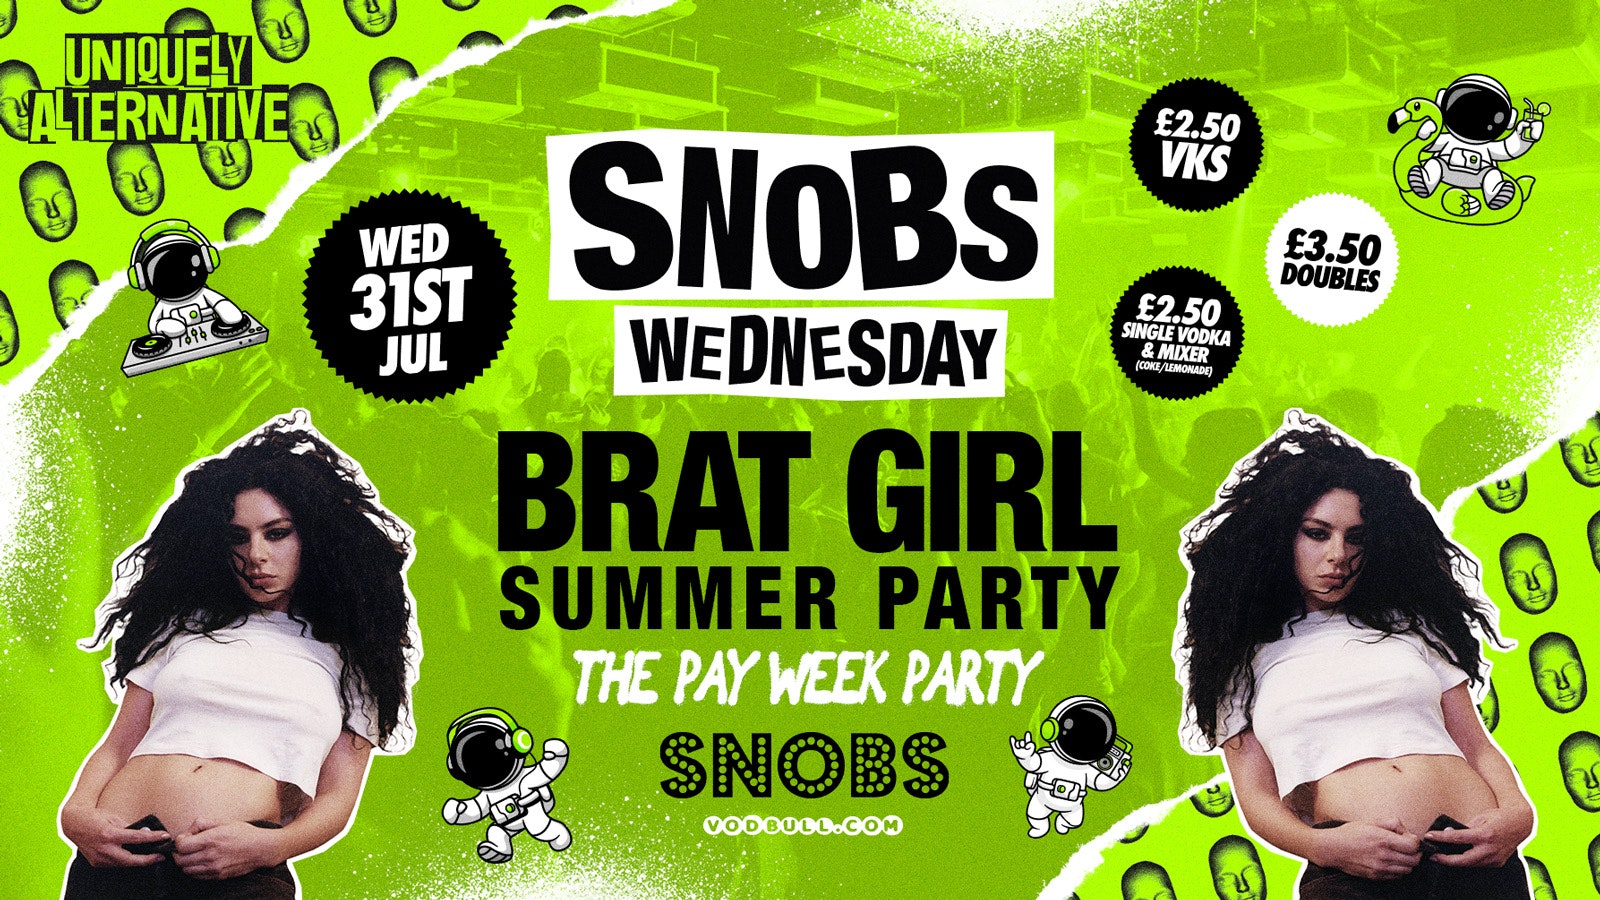 🎶 Snobs Wednesday BRAT GIRL PAY WEEK PARTY !!🎶 31/07